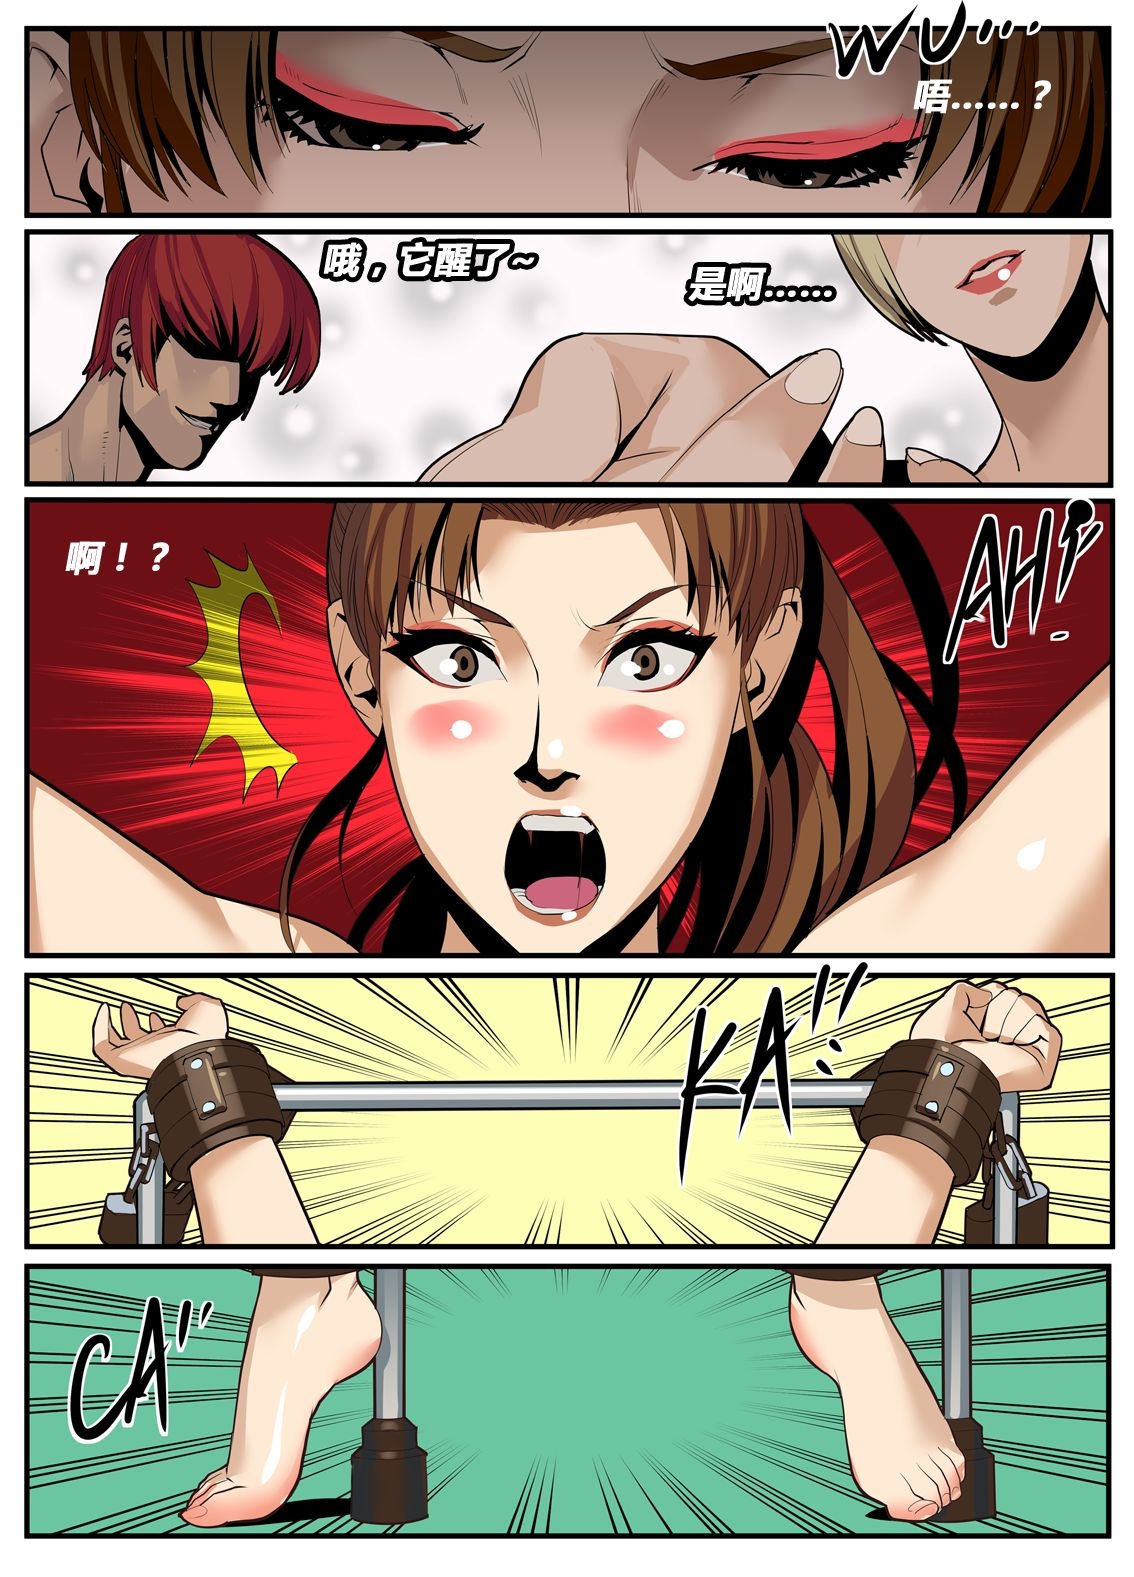 [chunlieater] The Lust of Mai Shiranui (King of Fighters) [Chinese] 39